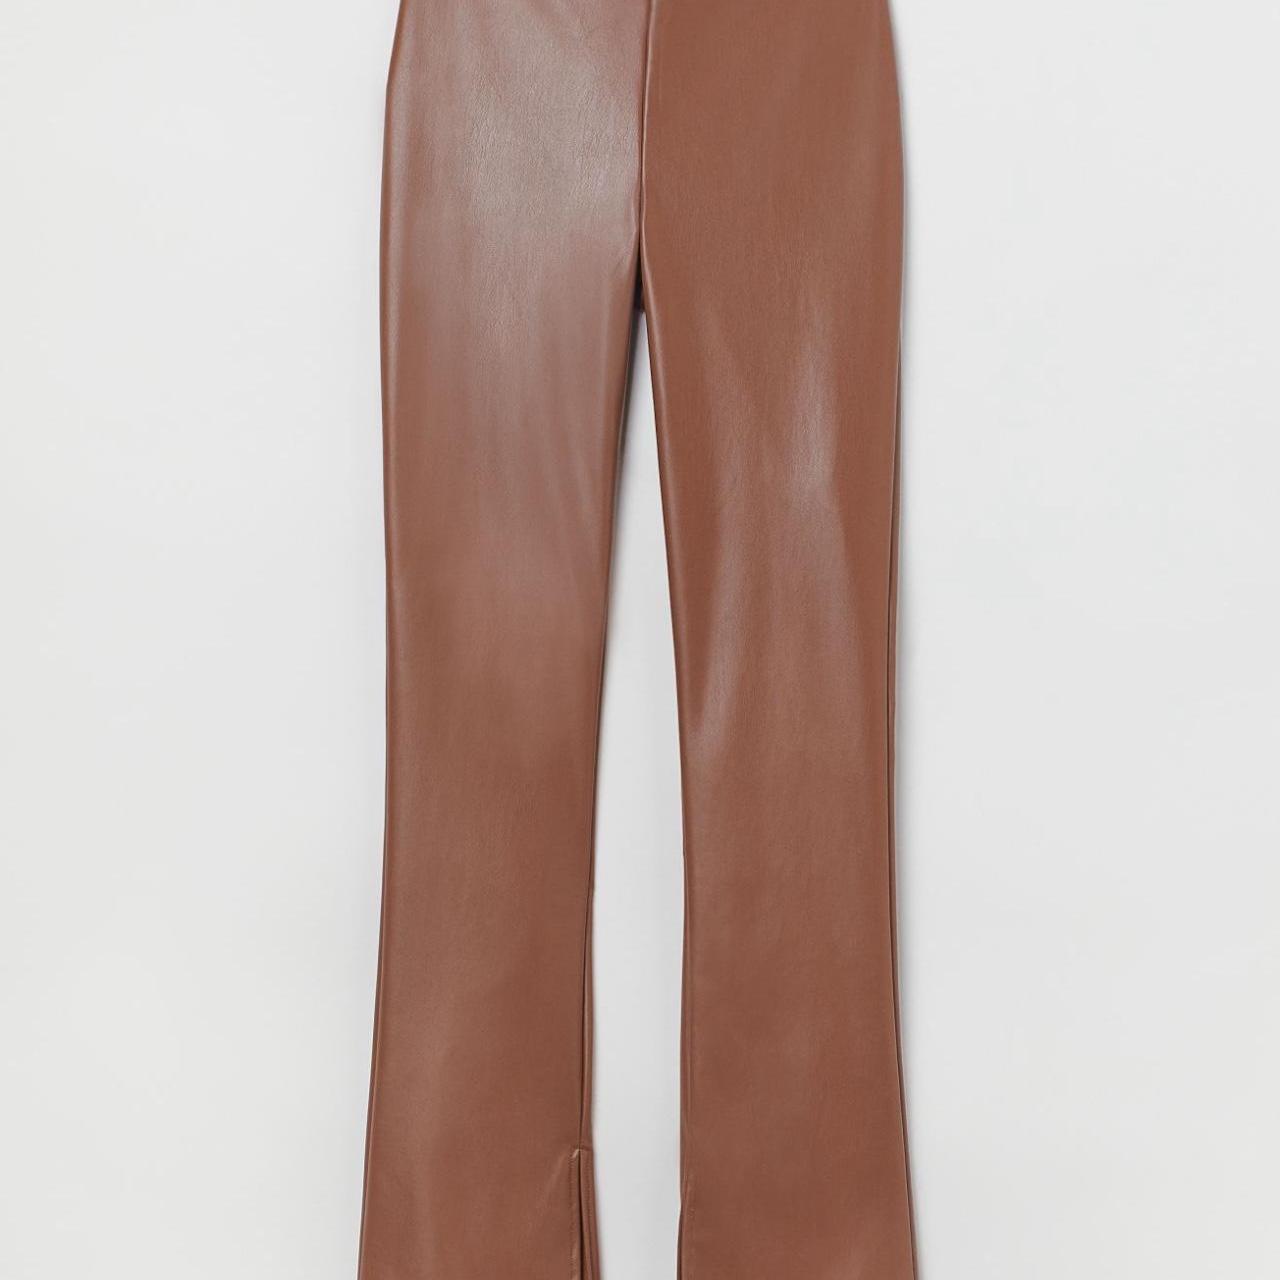 Brown faux leather pants, H&M flared leggings , I’ve